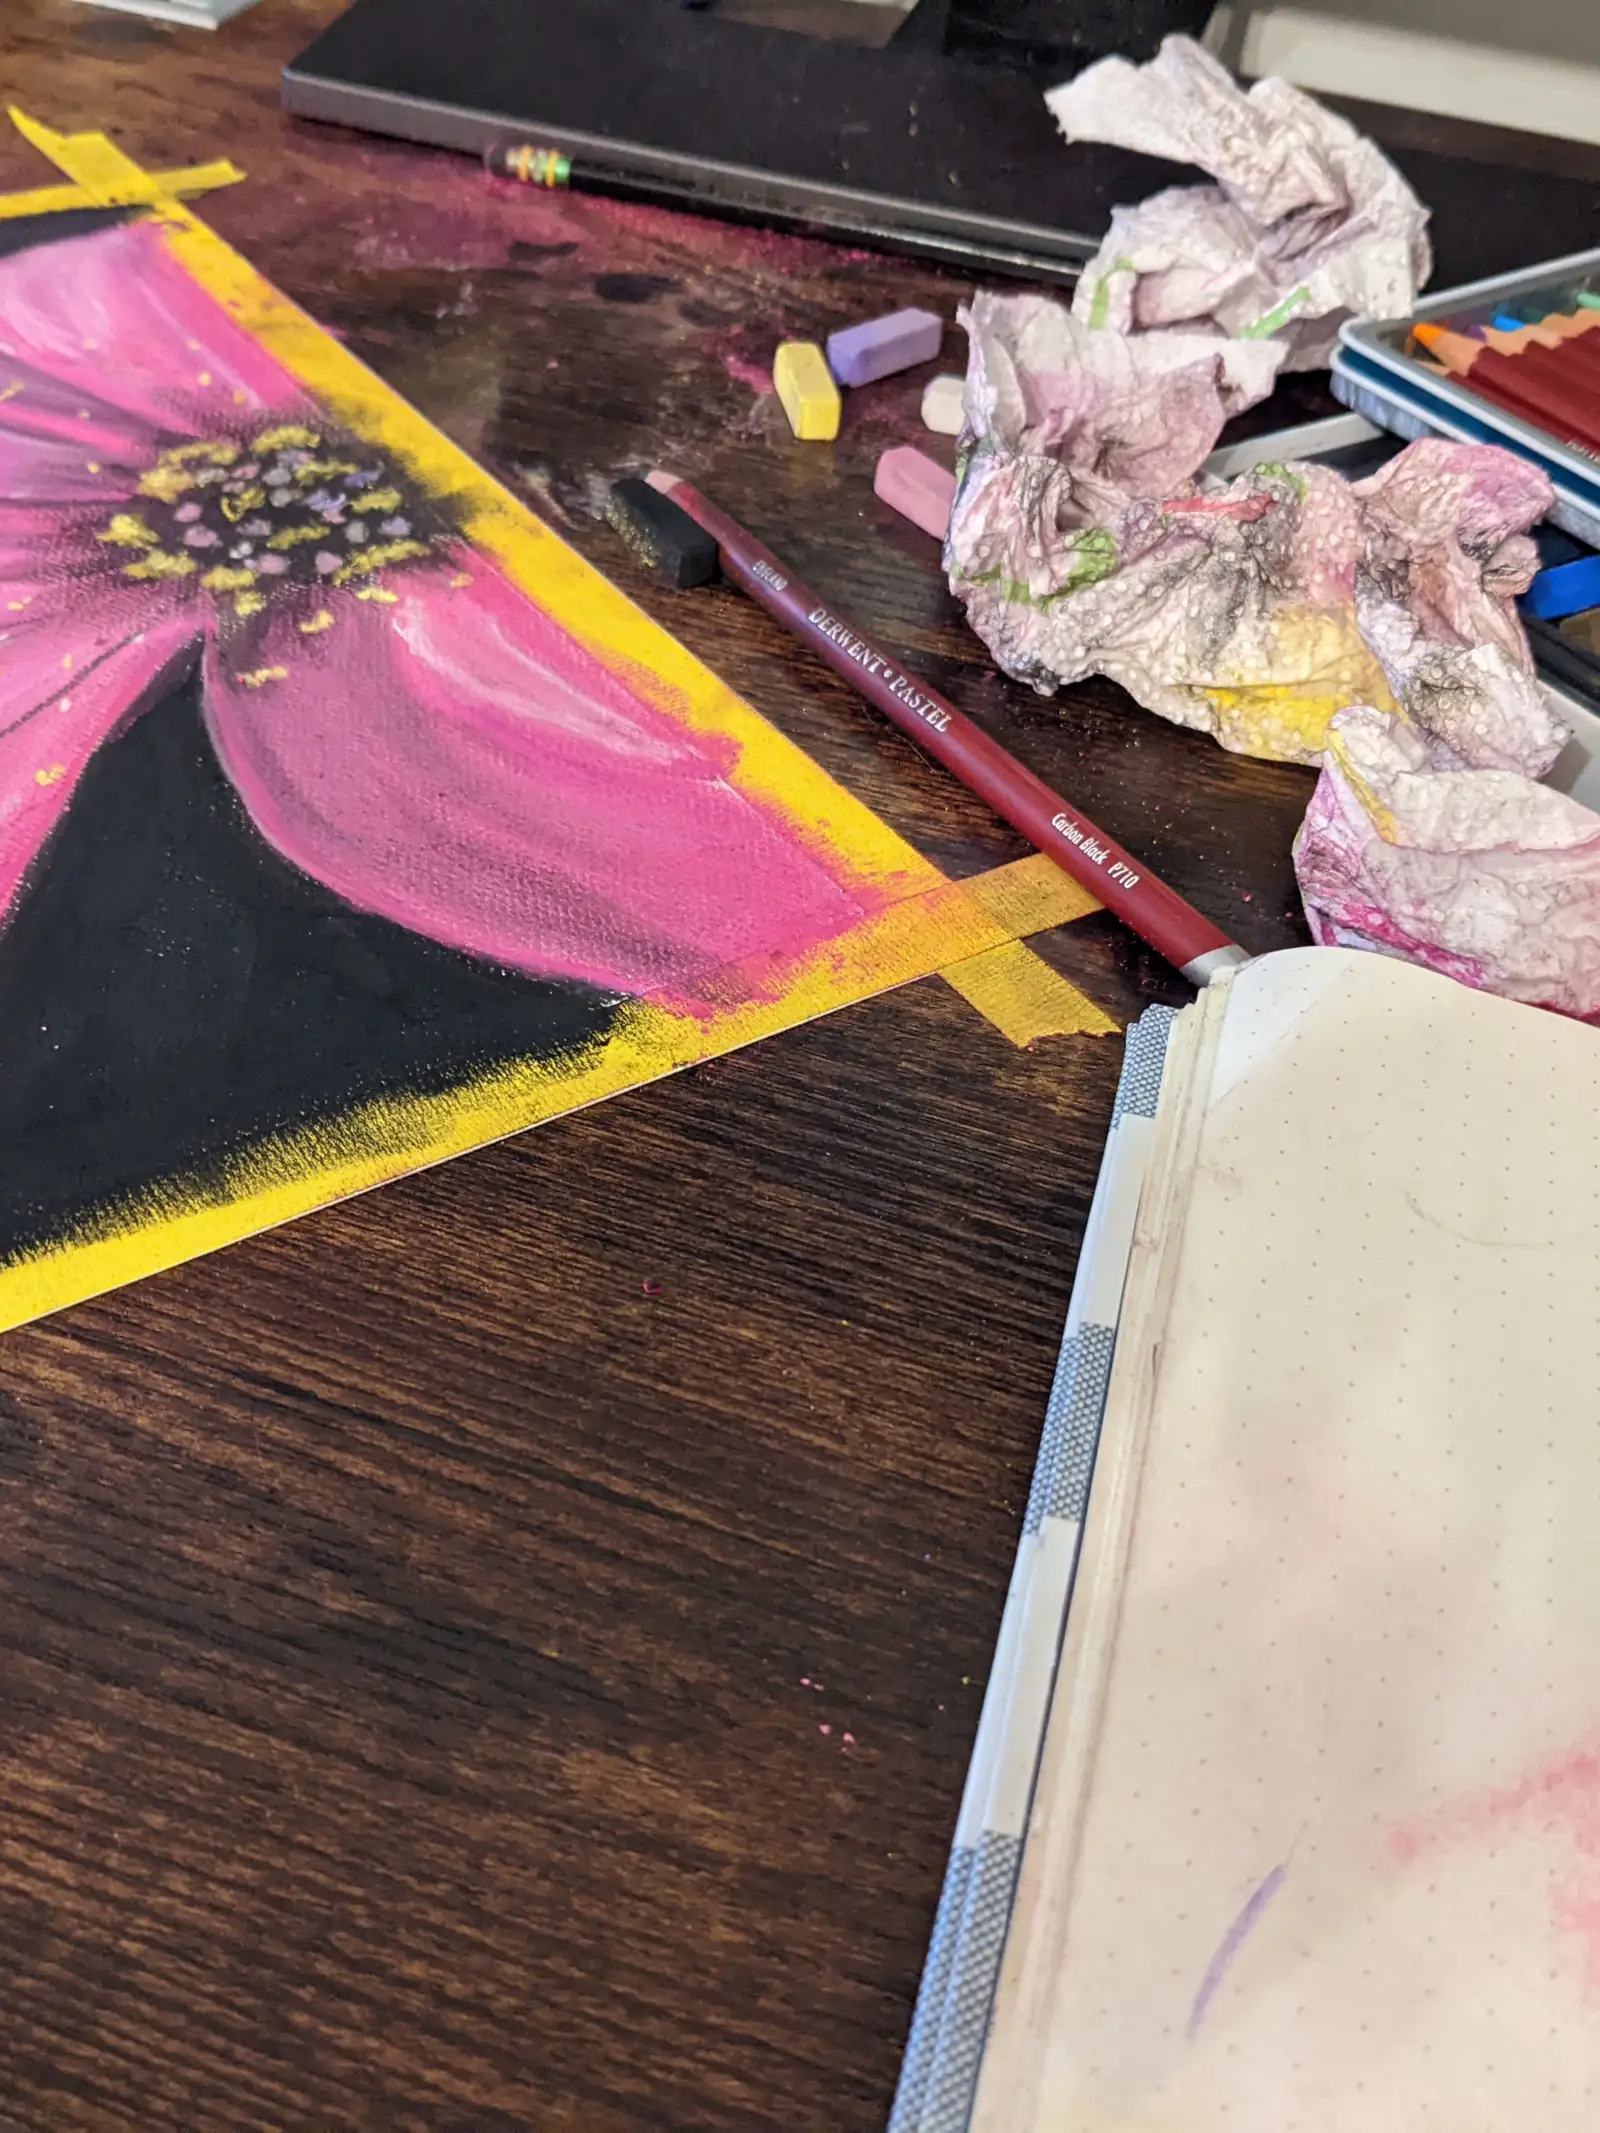 Pink daisy drawing taped to desk alongside pencils, pastels, and dirty paper towels.